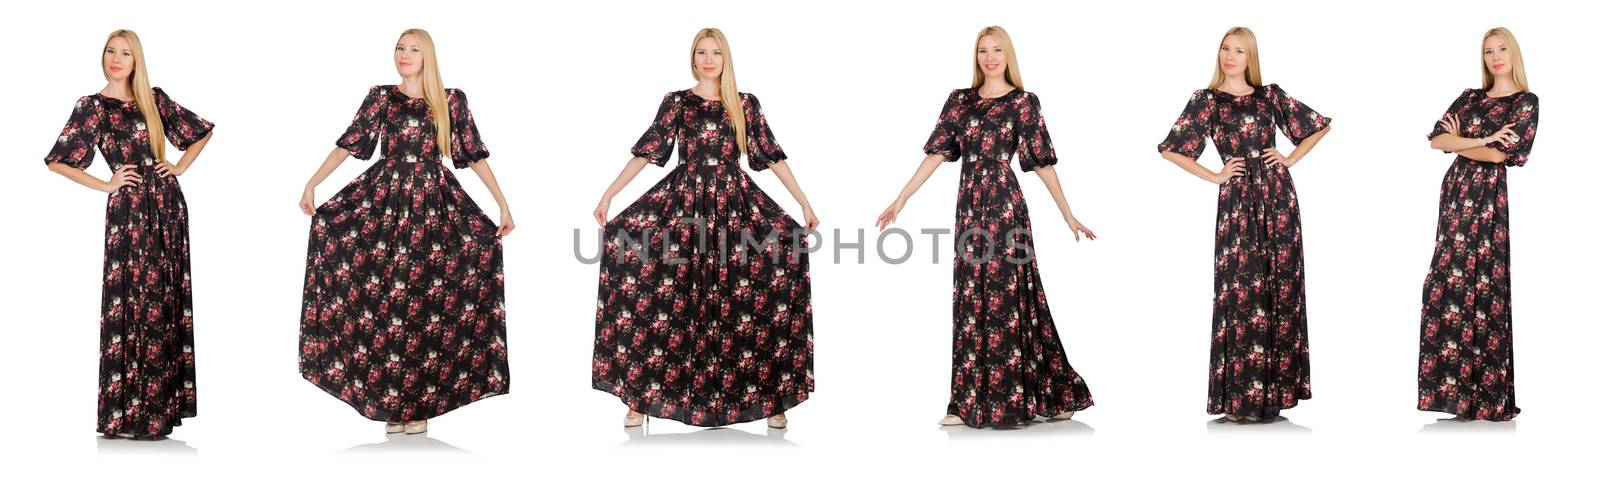 Pretty woman in romantic dress isolated on white